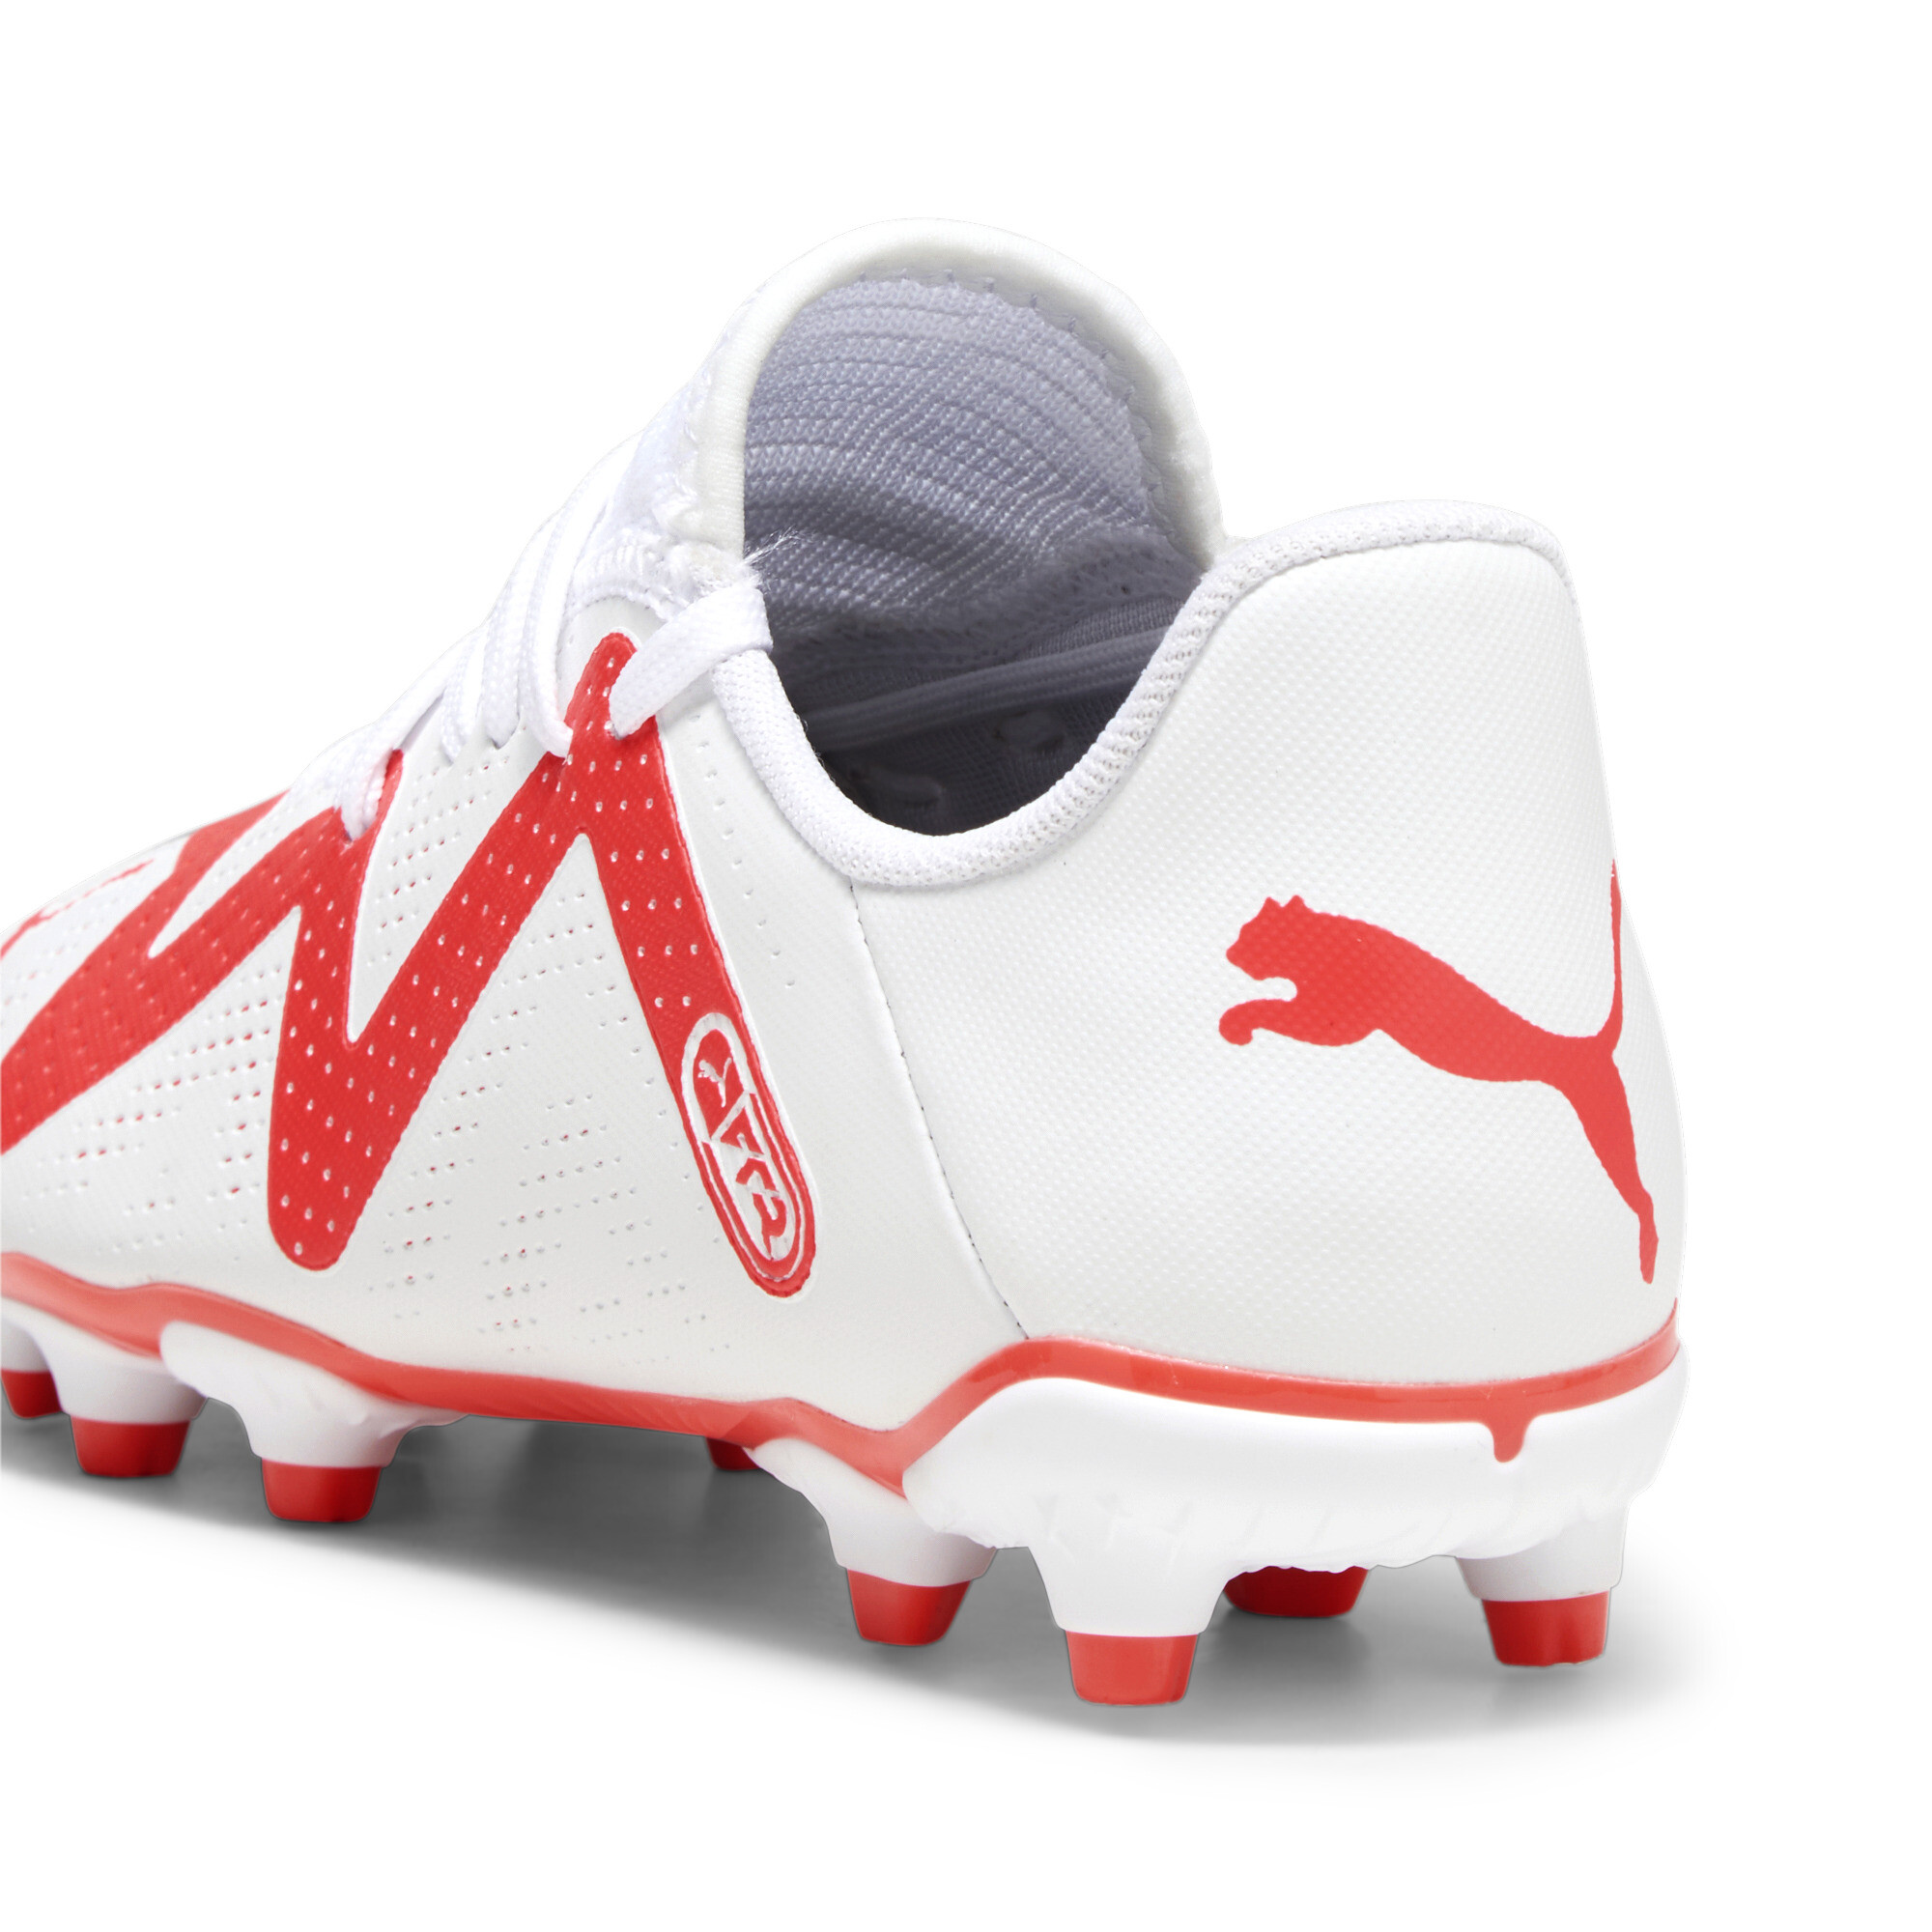 Puma FUTURE PLAY FG/AG Youth Football Boots, White, Size 37, Shoes